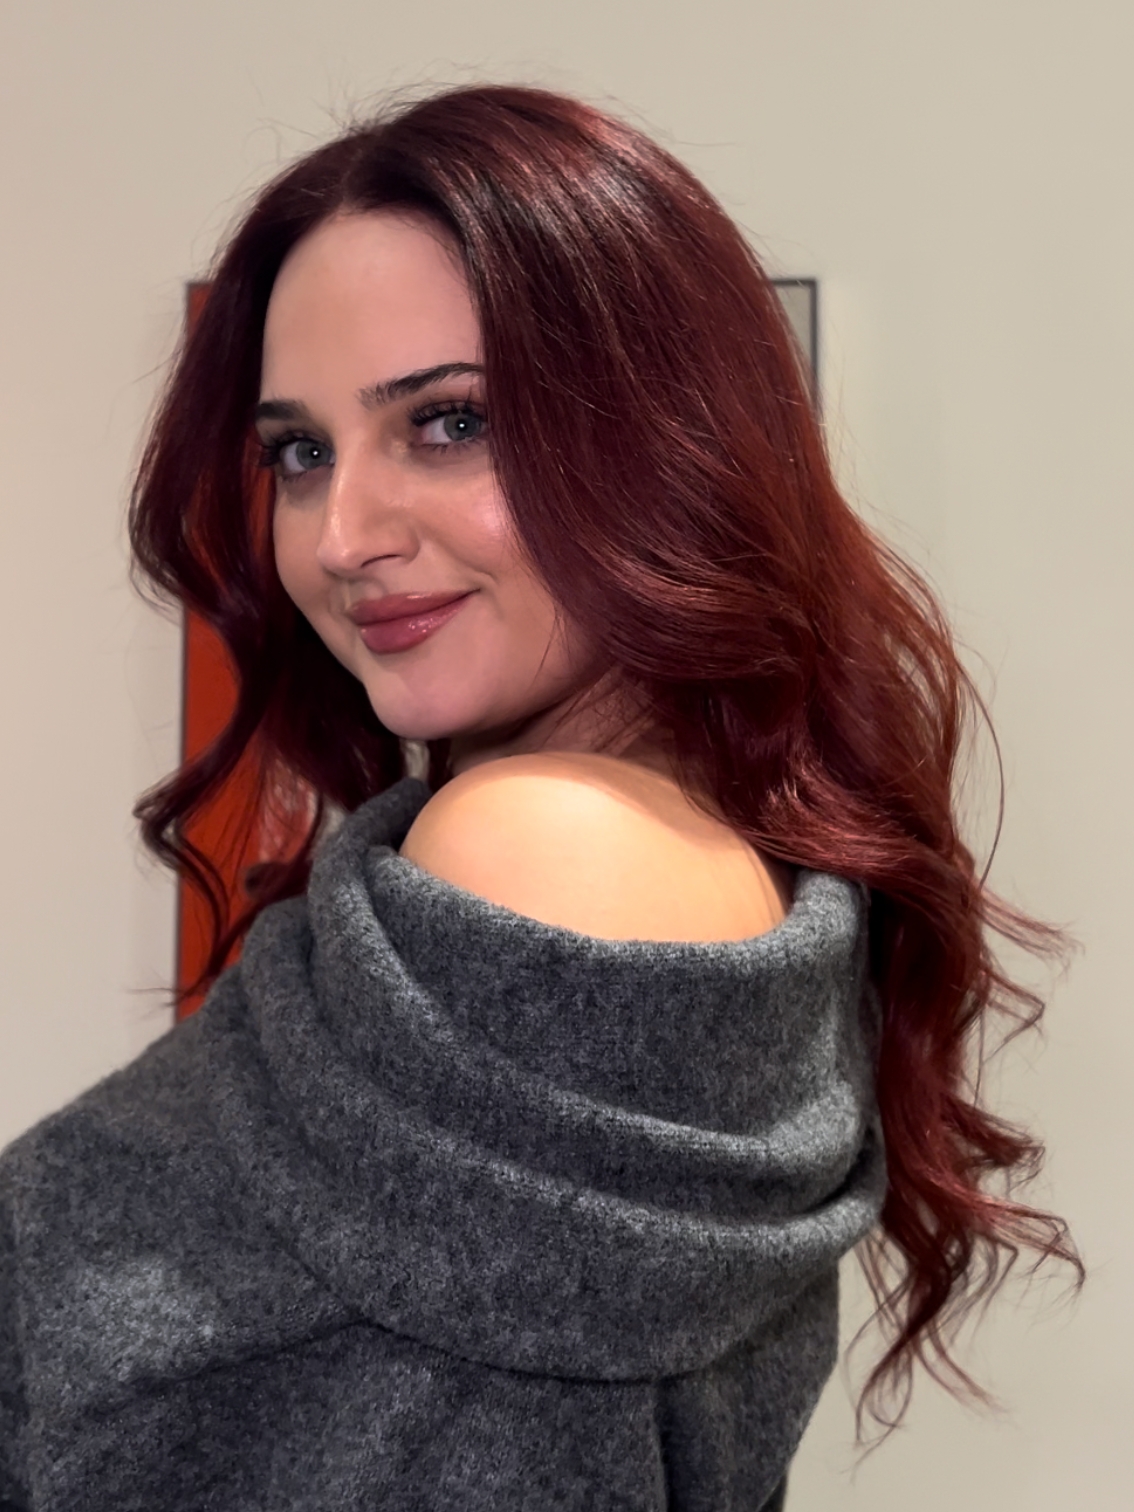 Image of a woman with long, deep burgundy hair